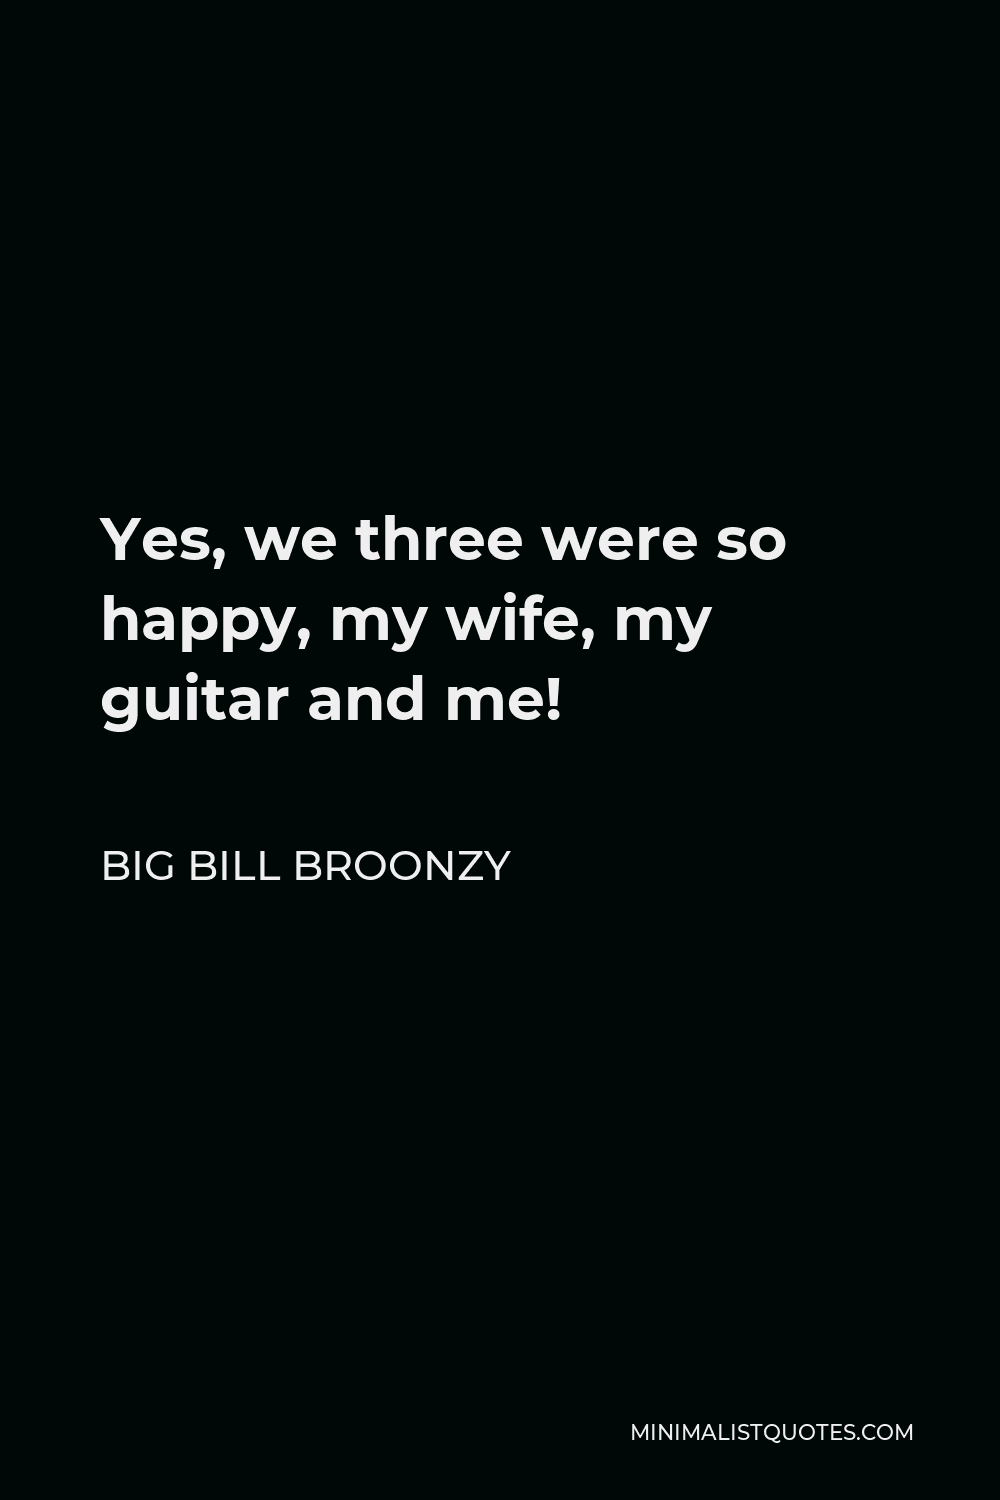 Big Bill Broonzy Quote - Yes, we three were so happy, my wife, my guitar and me!